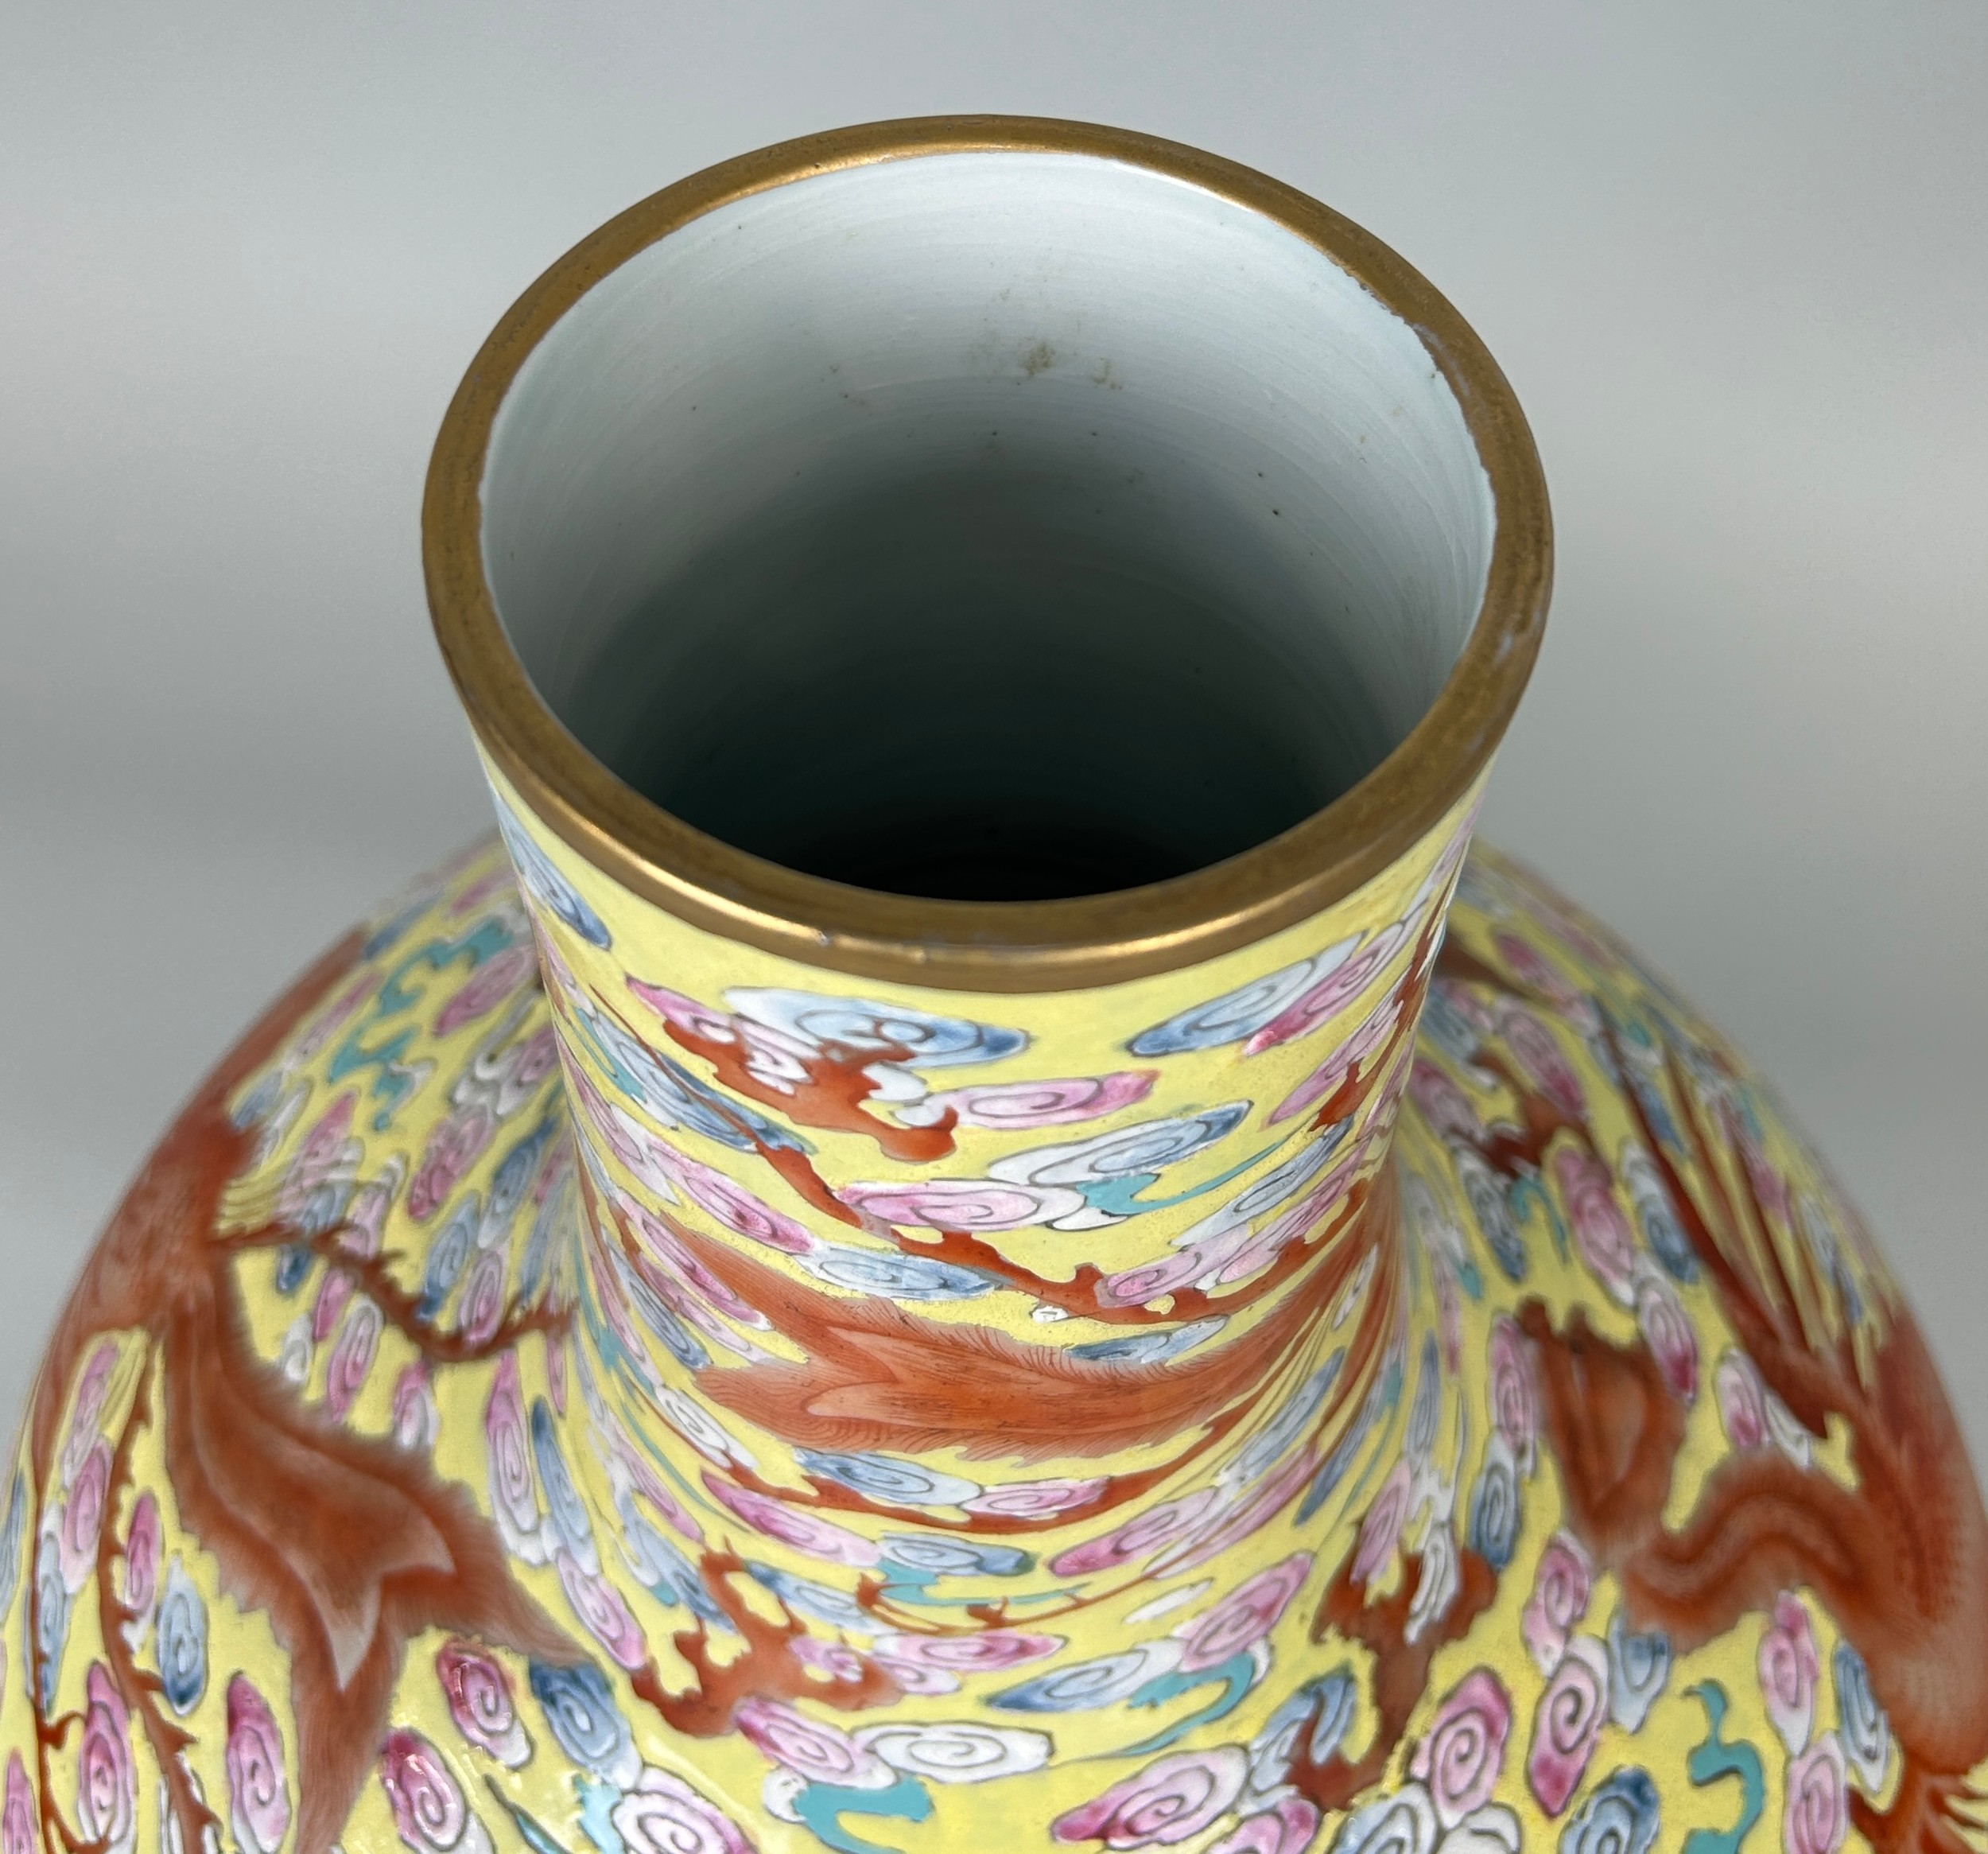 A LARGE CHINESE 'TIANQIUPING' VASE WITH QIANLONG MARK PROBABLY LATE 19TH OR EARLY 20TH CENTURY, - Image 9 of 10